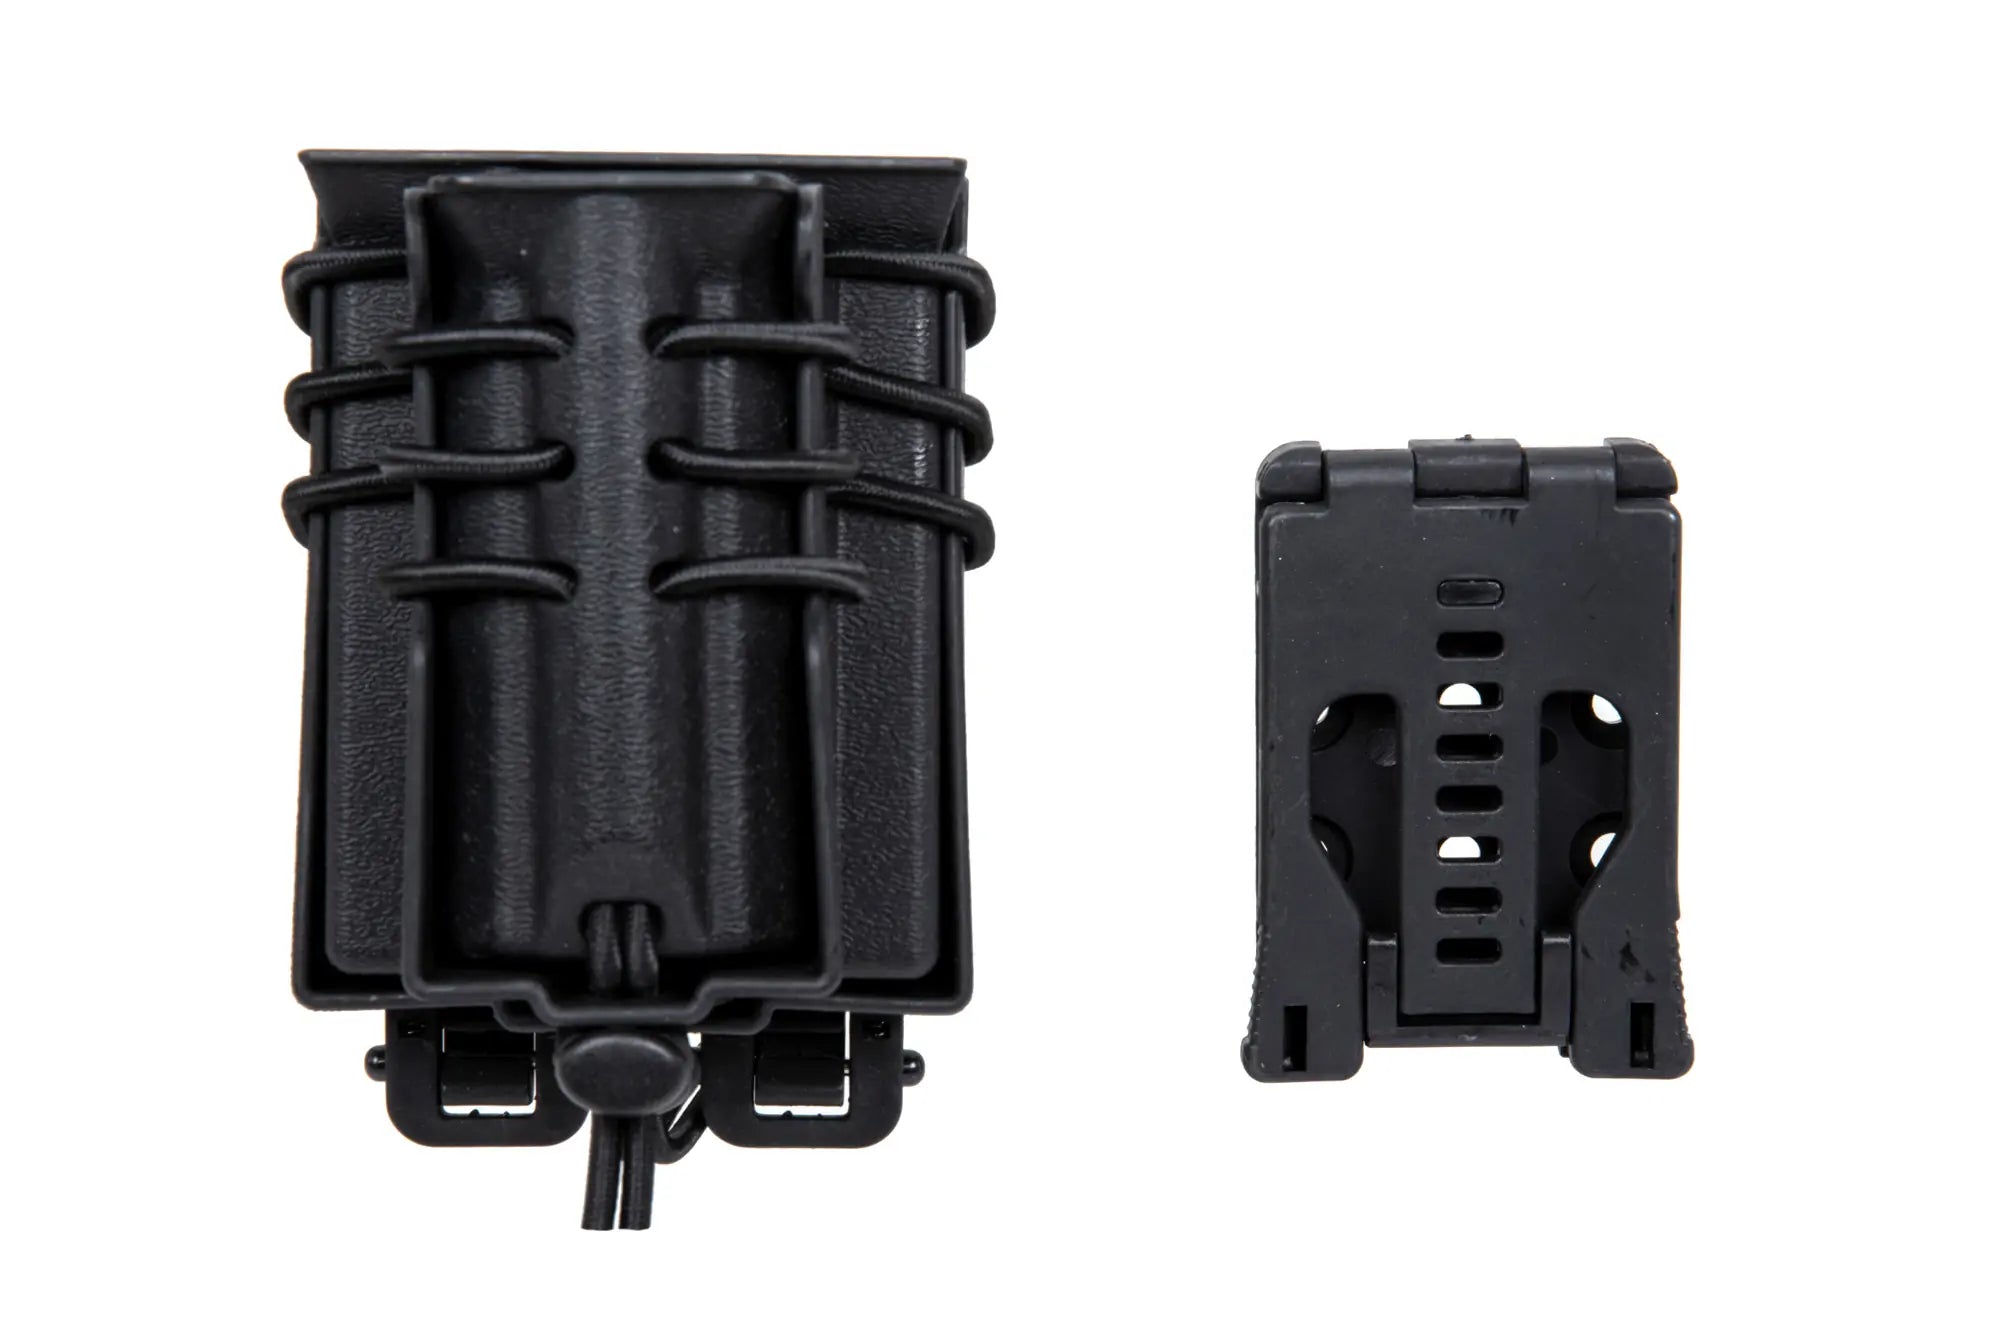 Carrier for 2 M4/M16 and 9mm magazines Wosport Urban Assault Quick Pull Black-1